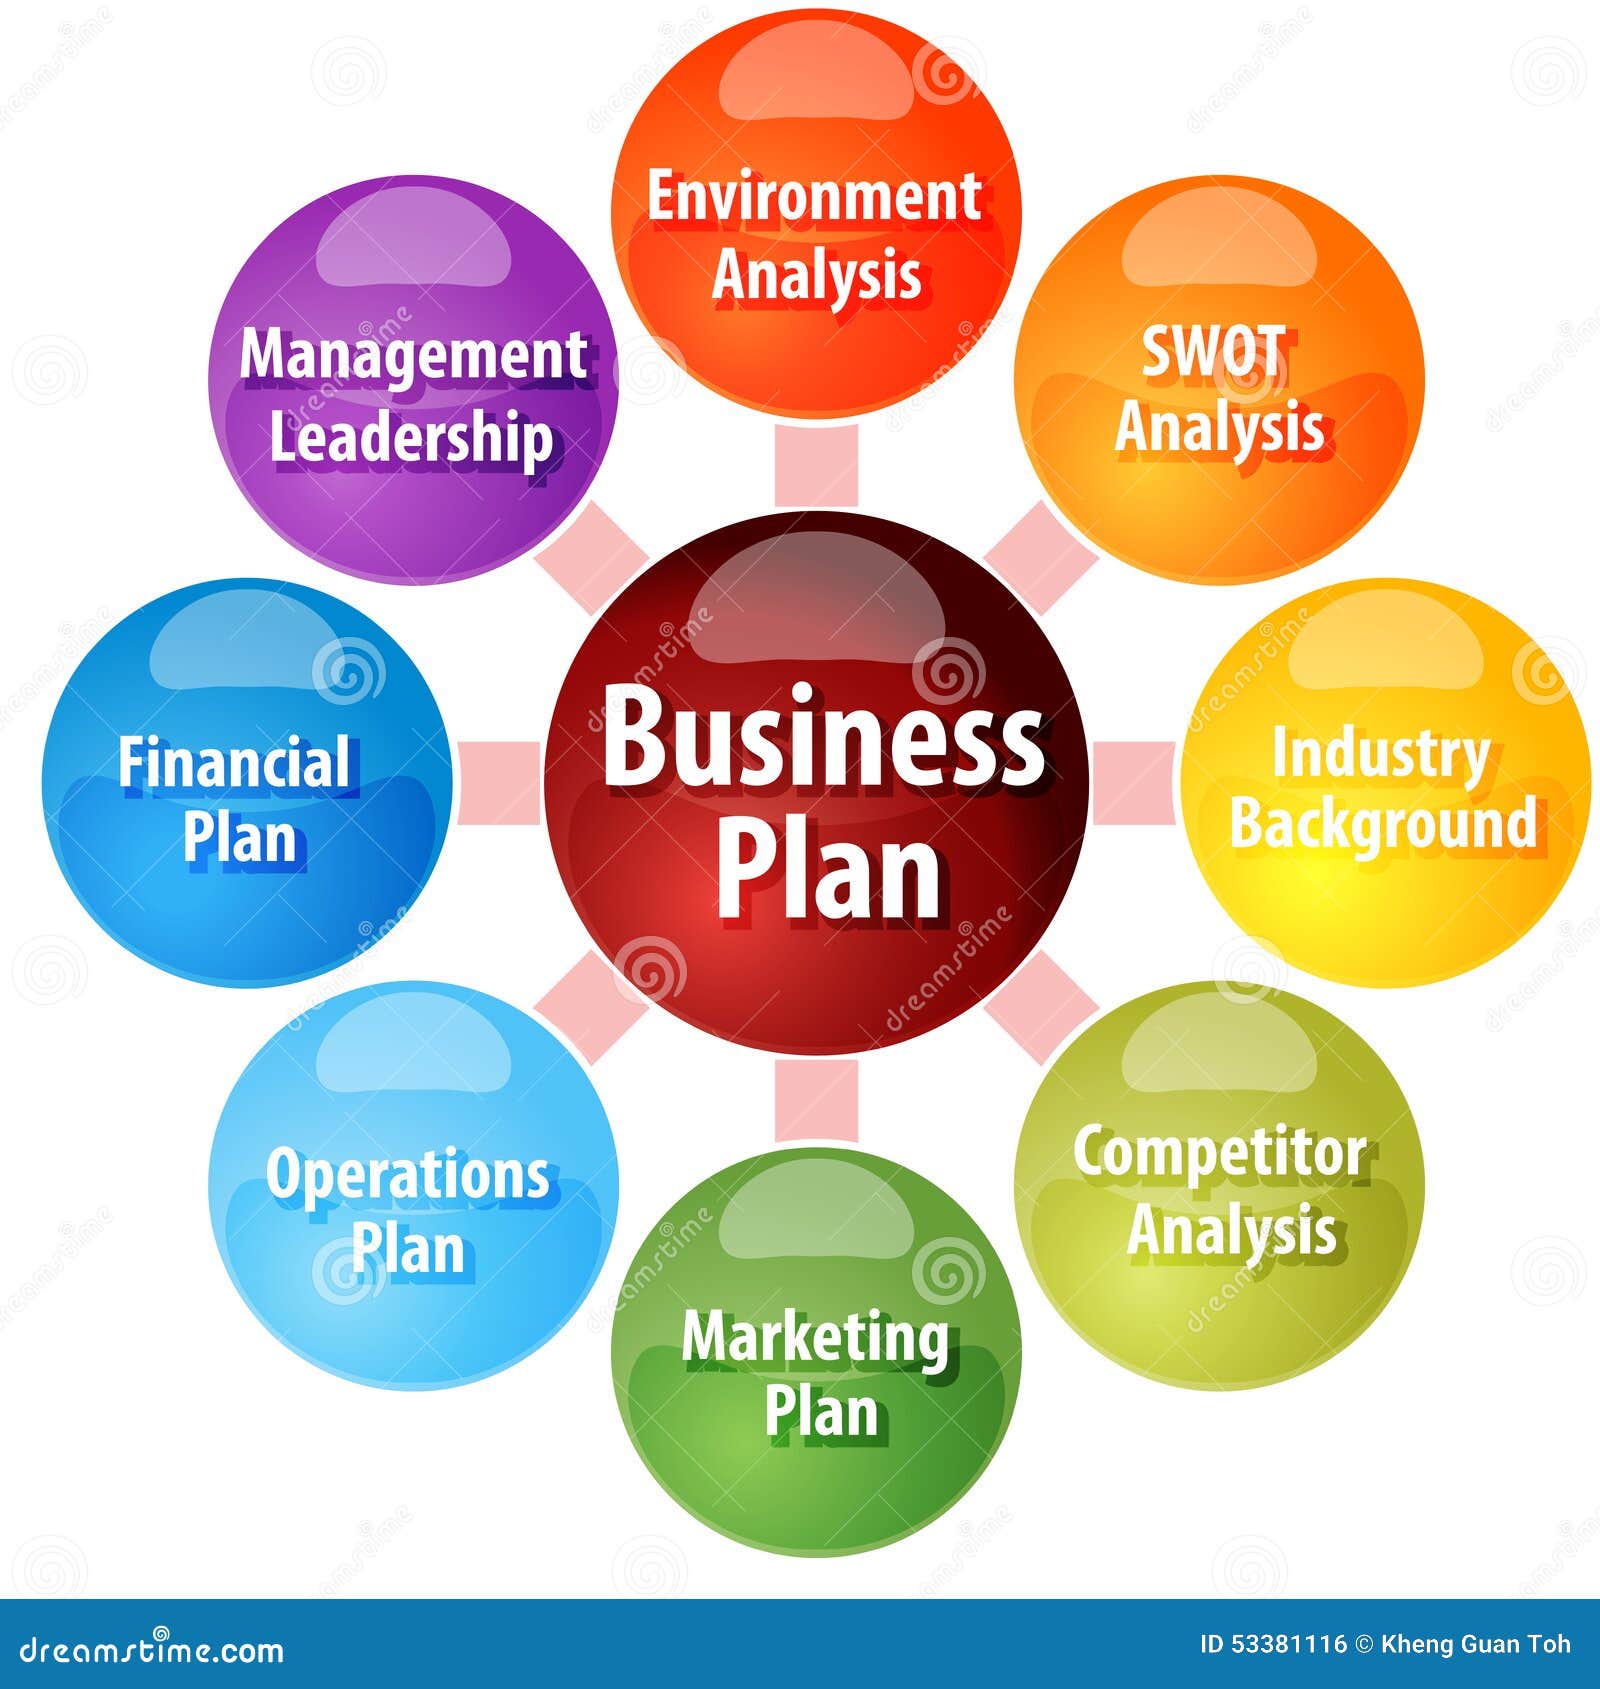 seven key elements of a business plan